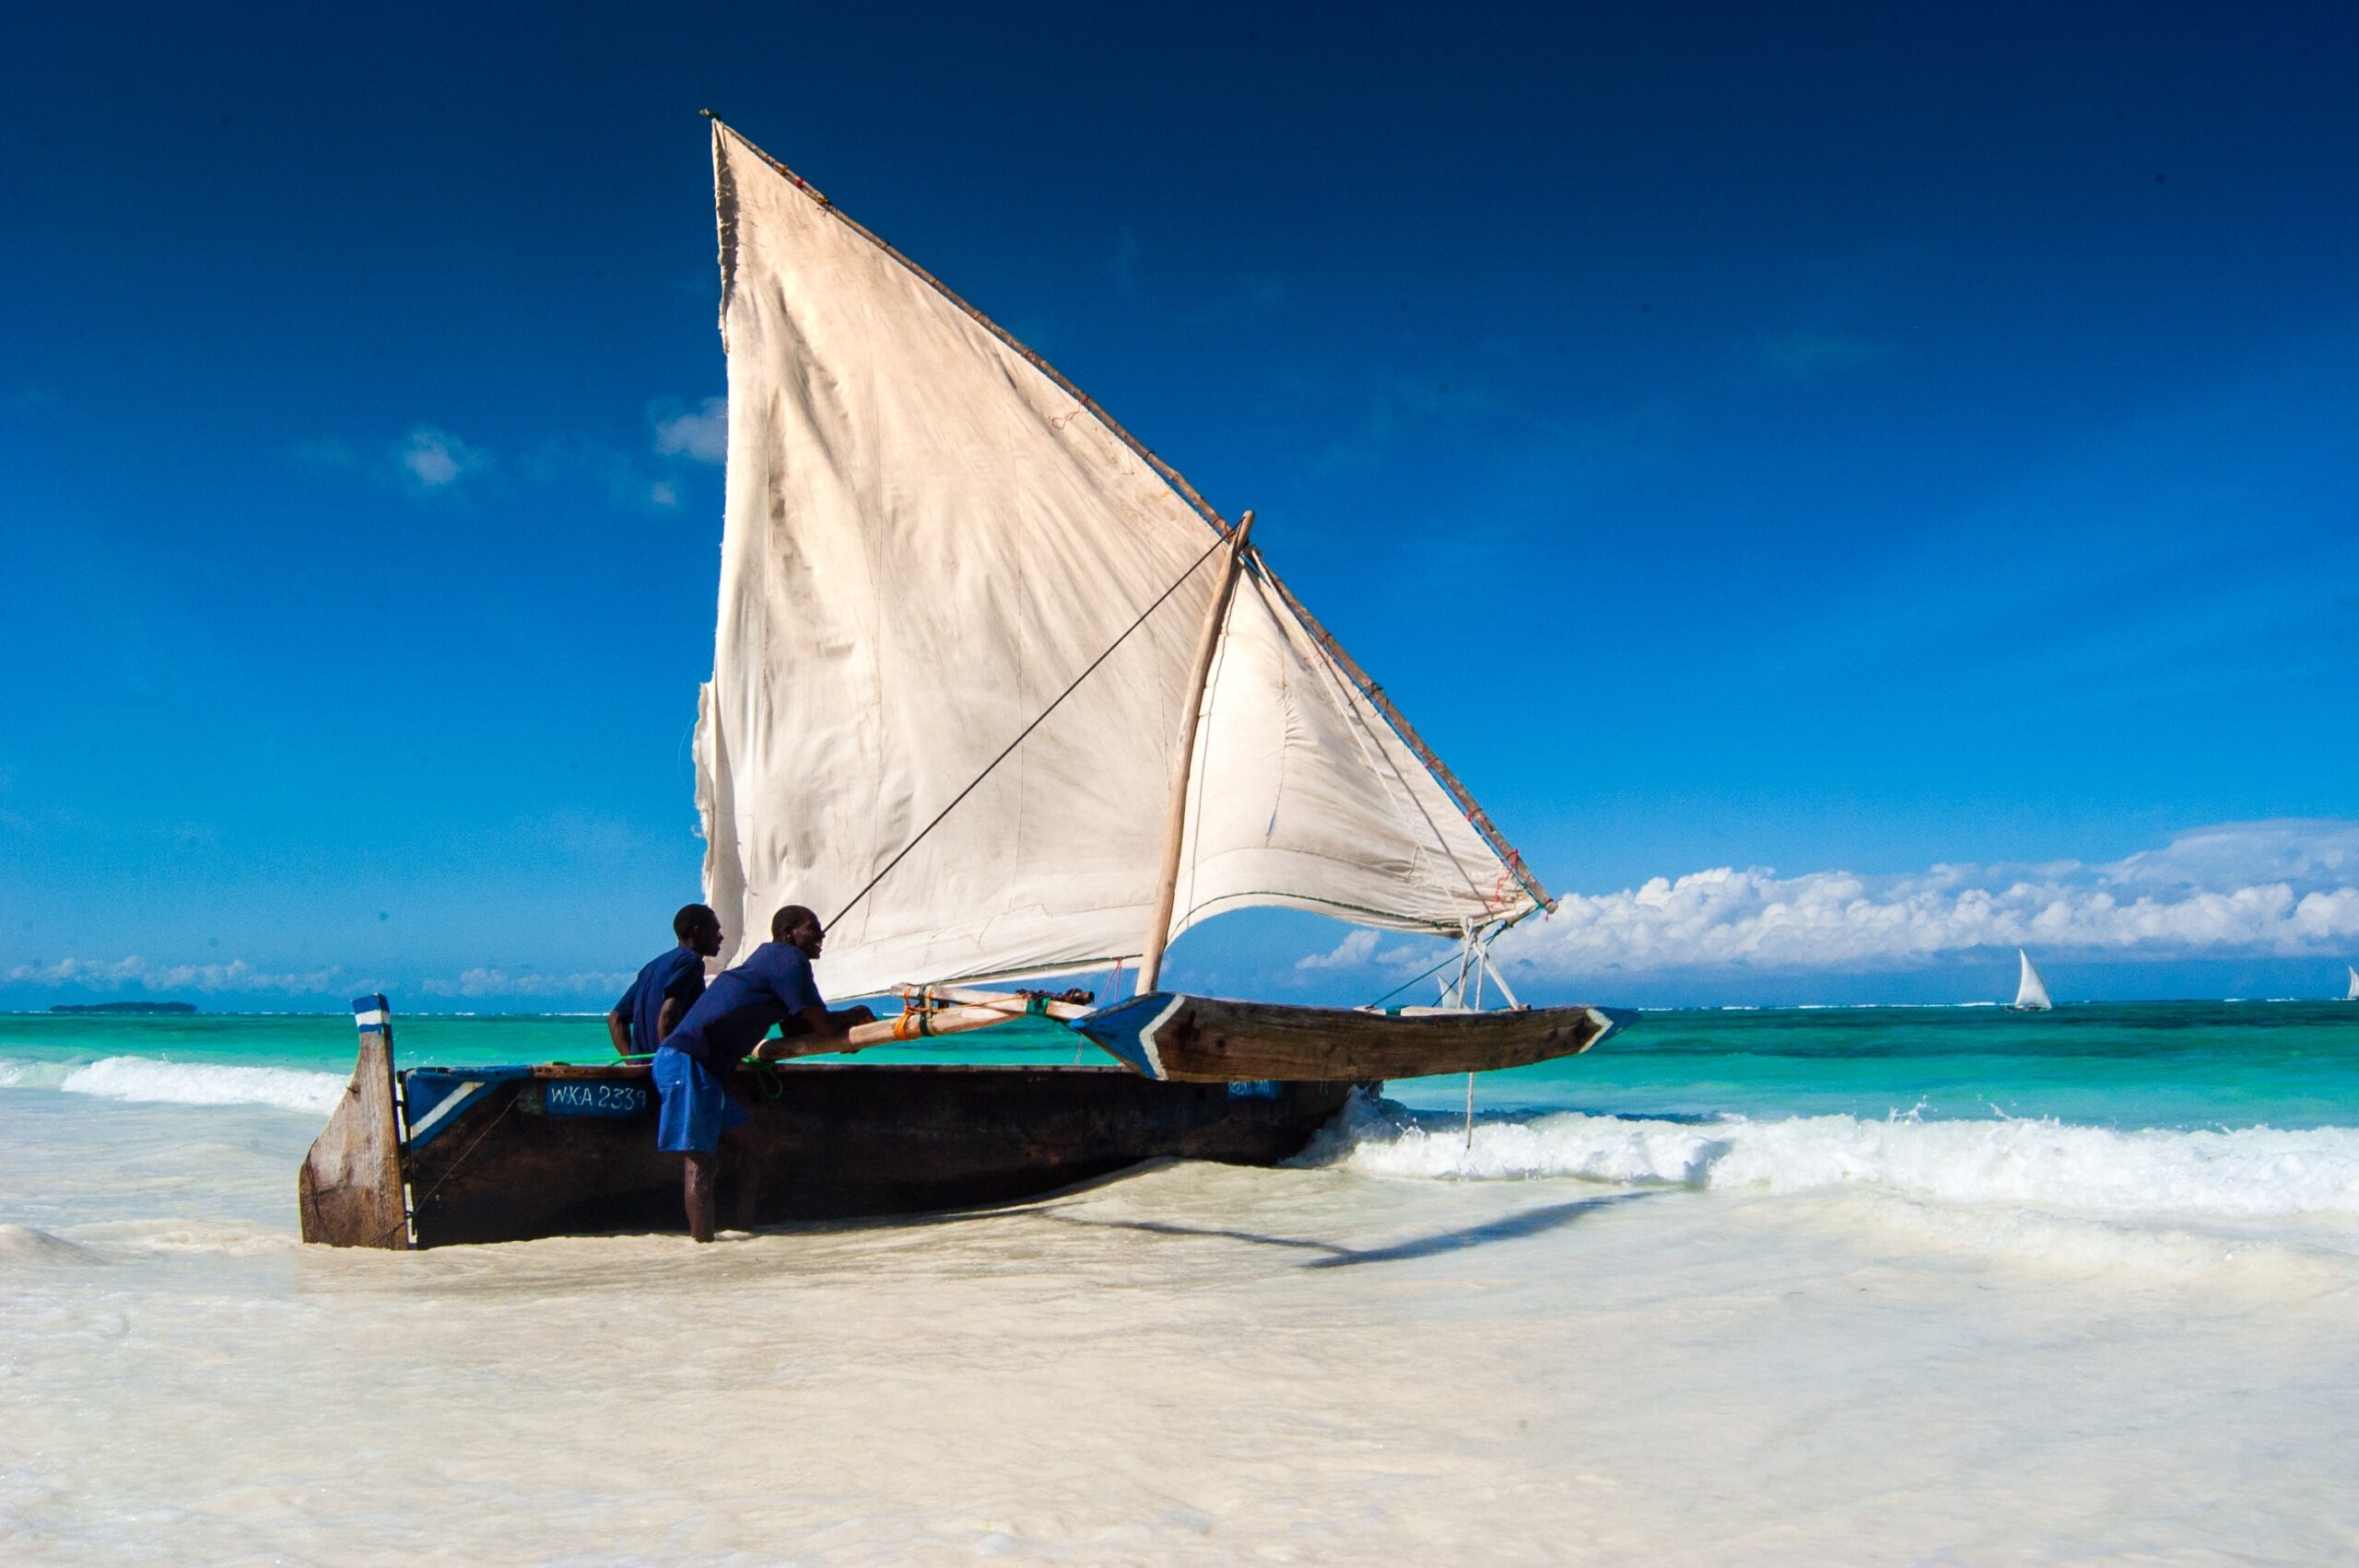 The beaches of Zanzibar are beautiful and the water is blue